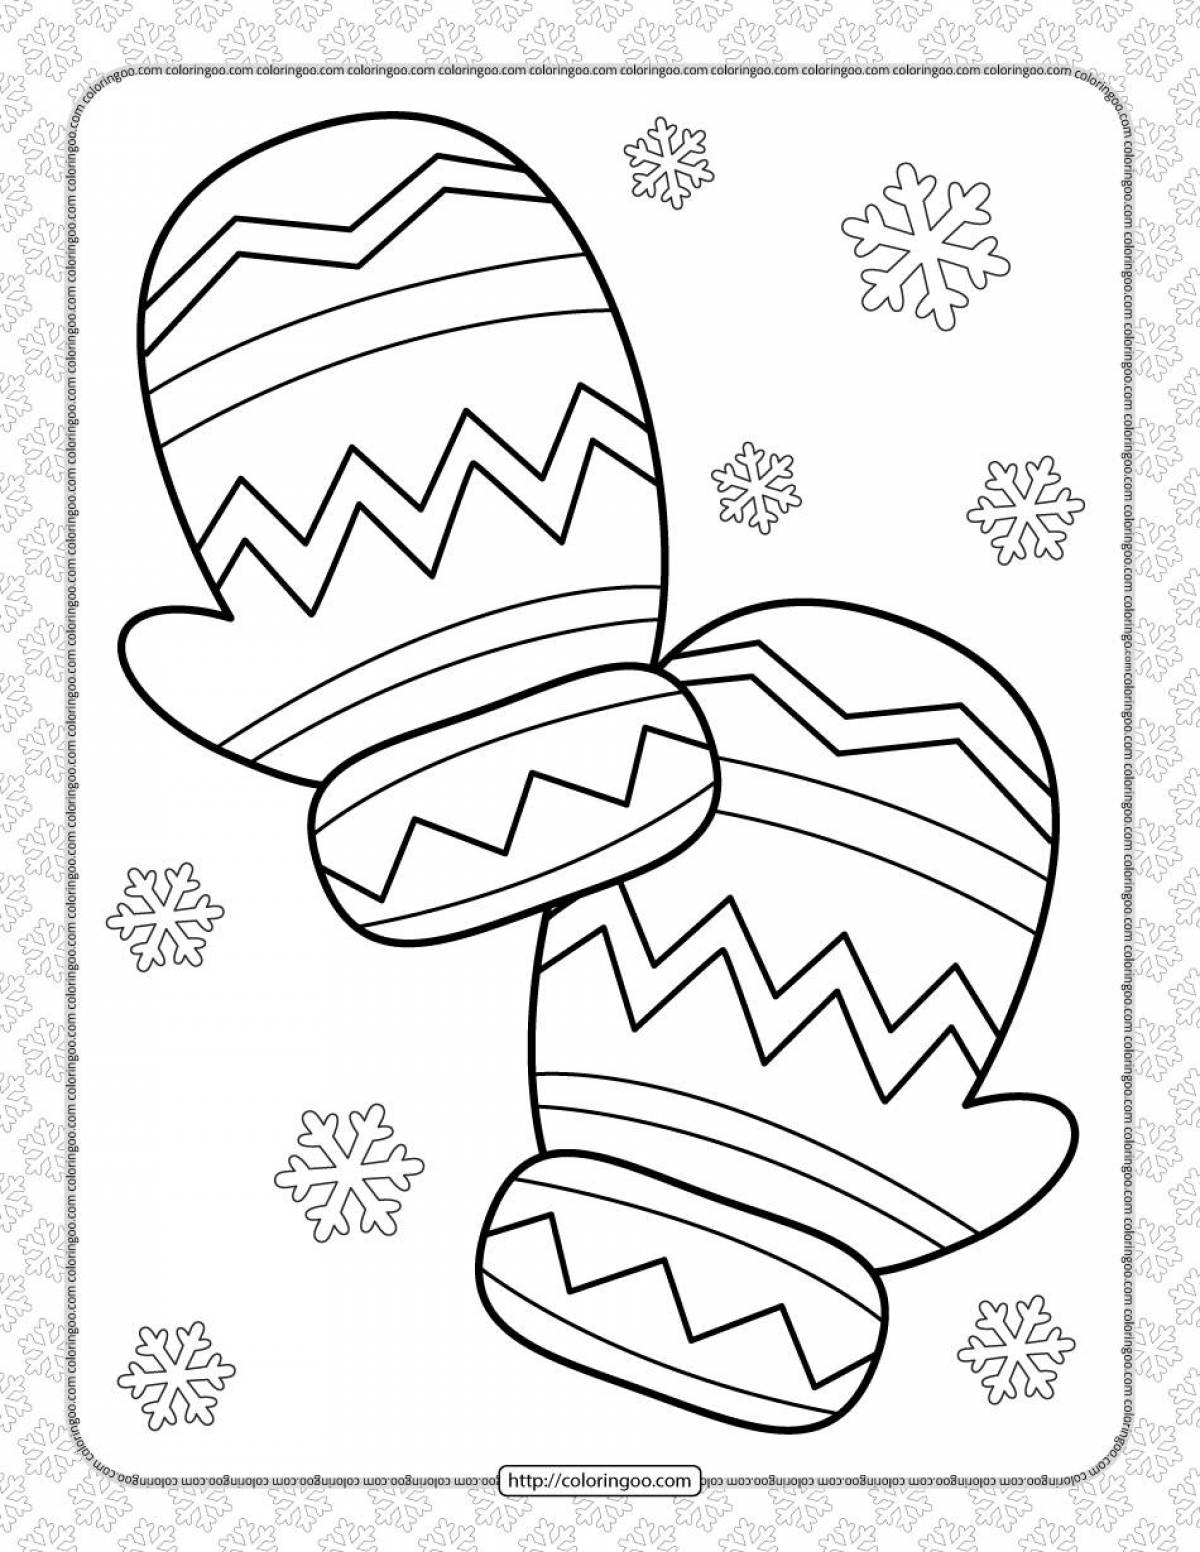 Funny coloring book of mittens for children 3-4 years old